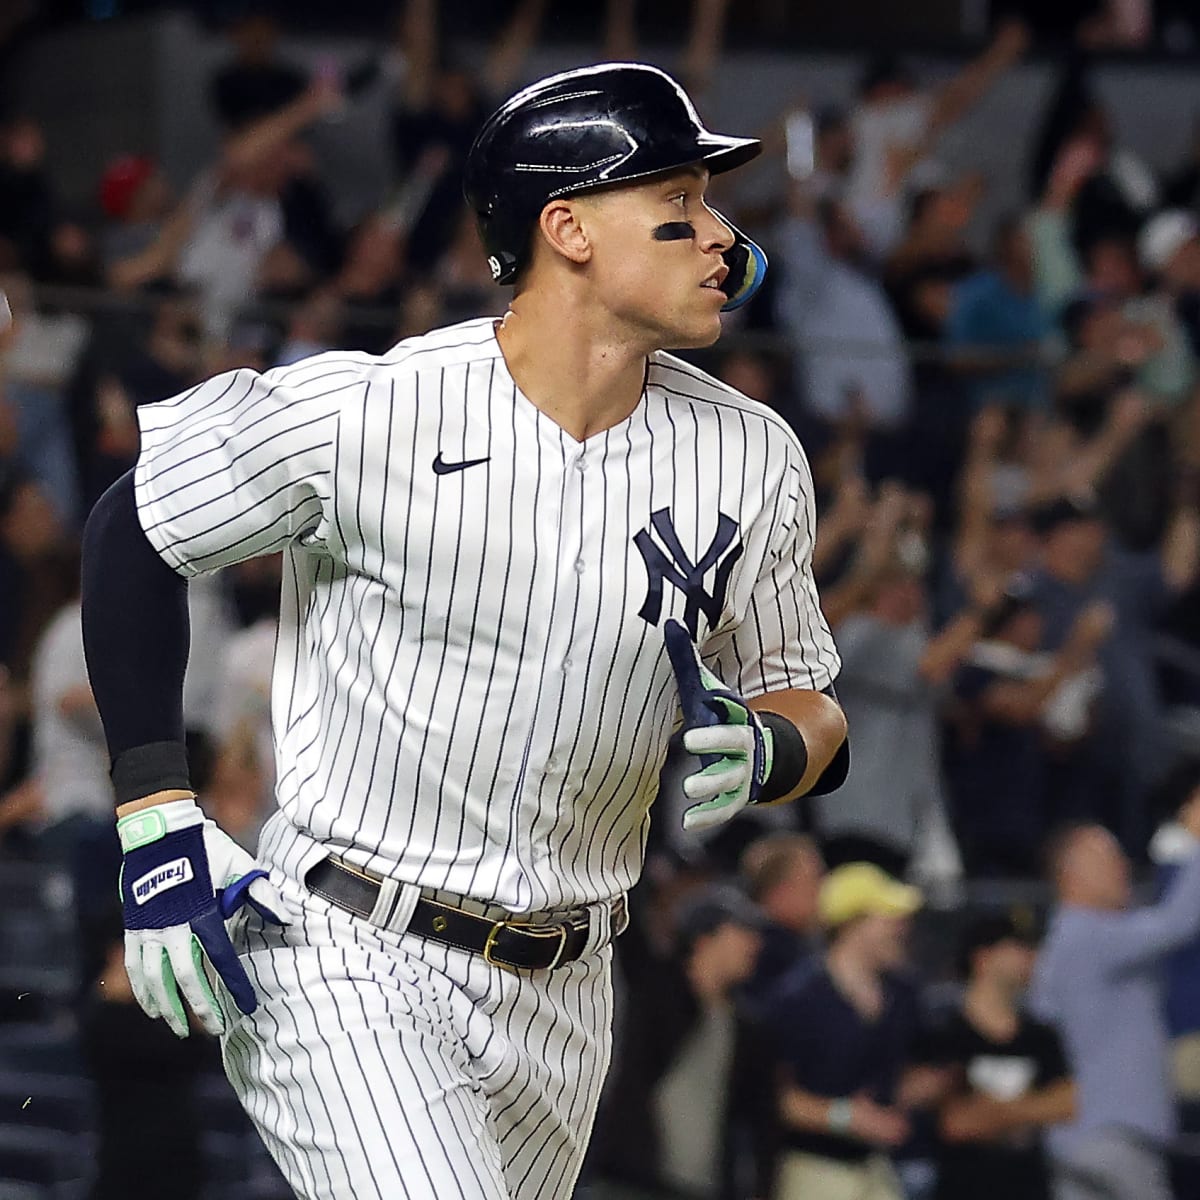 Aaron Judge Broke a Tooth While Celebrating a Walk-Off Home Run